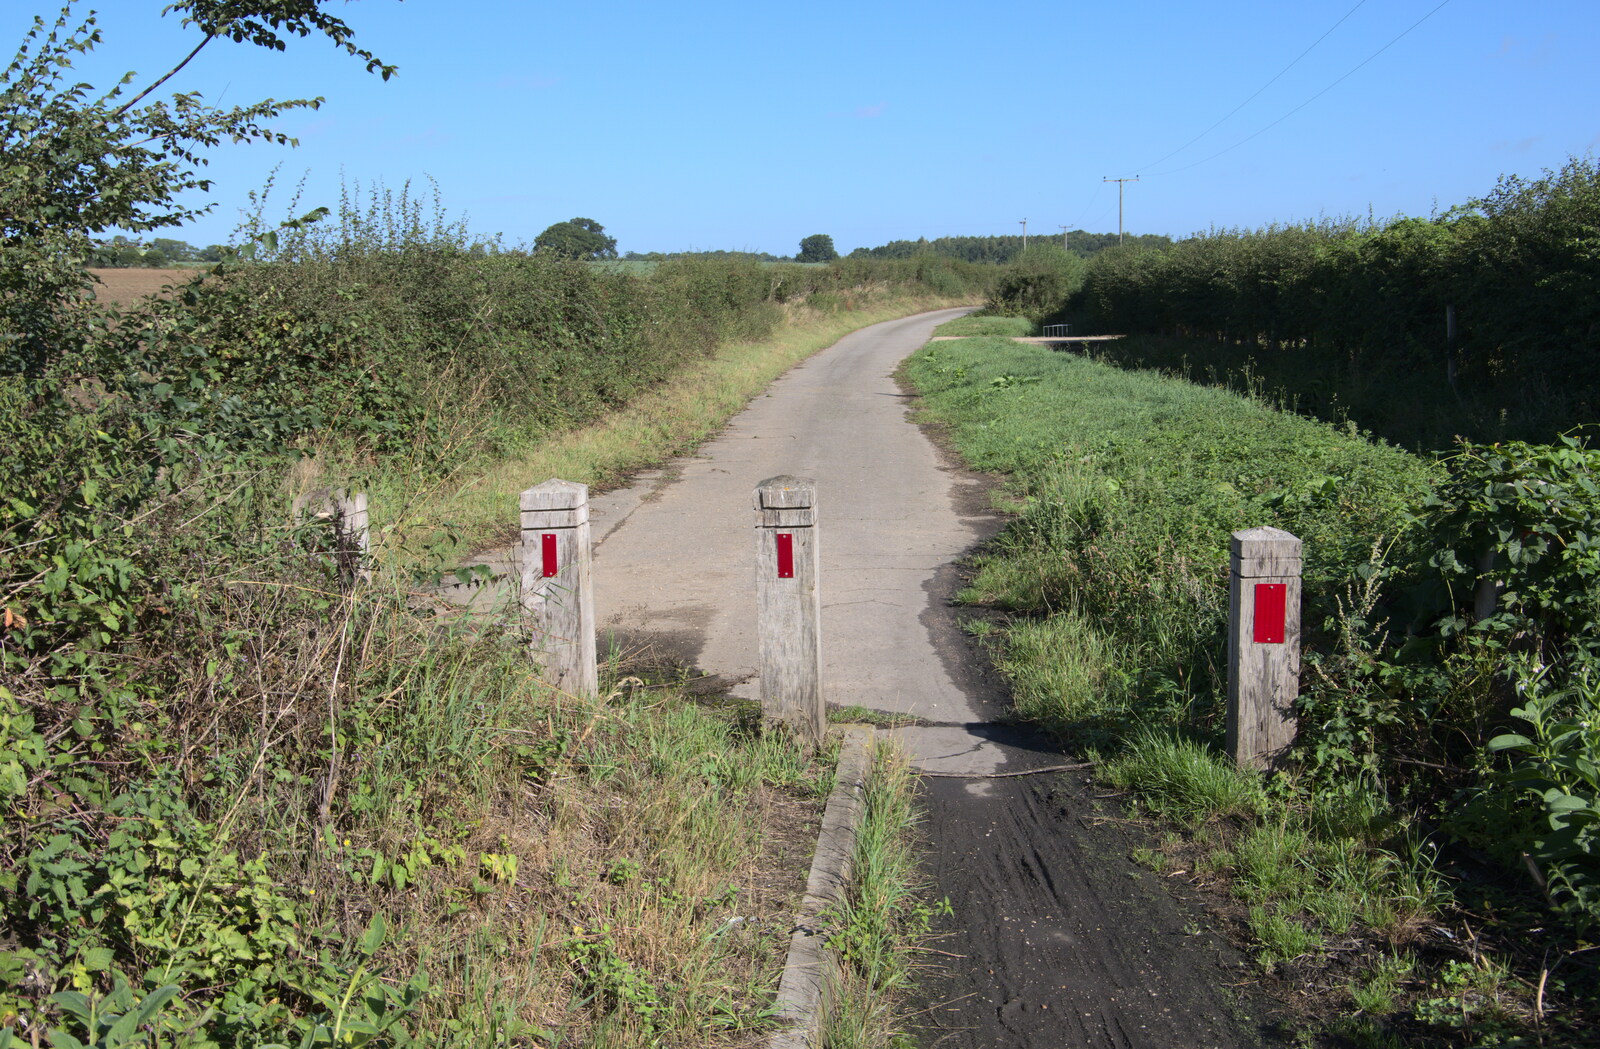 The old Thelveton road, now cut off by the A143 from A Sail Fitting, Billingford Windmill, Billingford, Norfolk - 20th August 2020